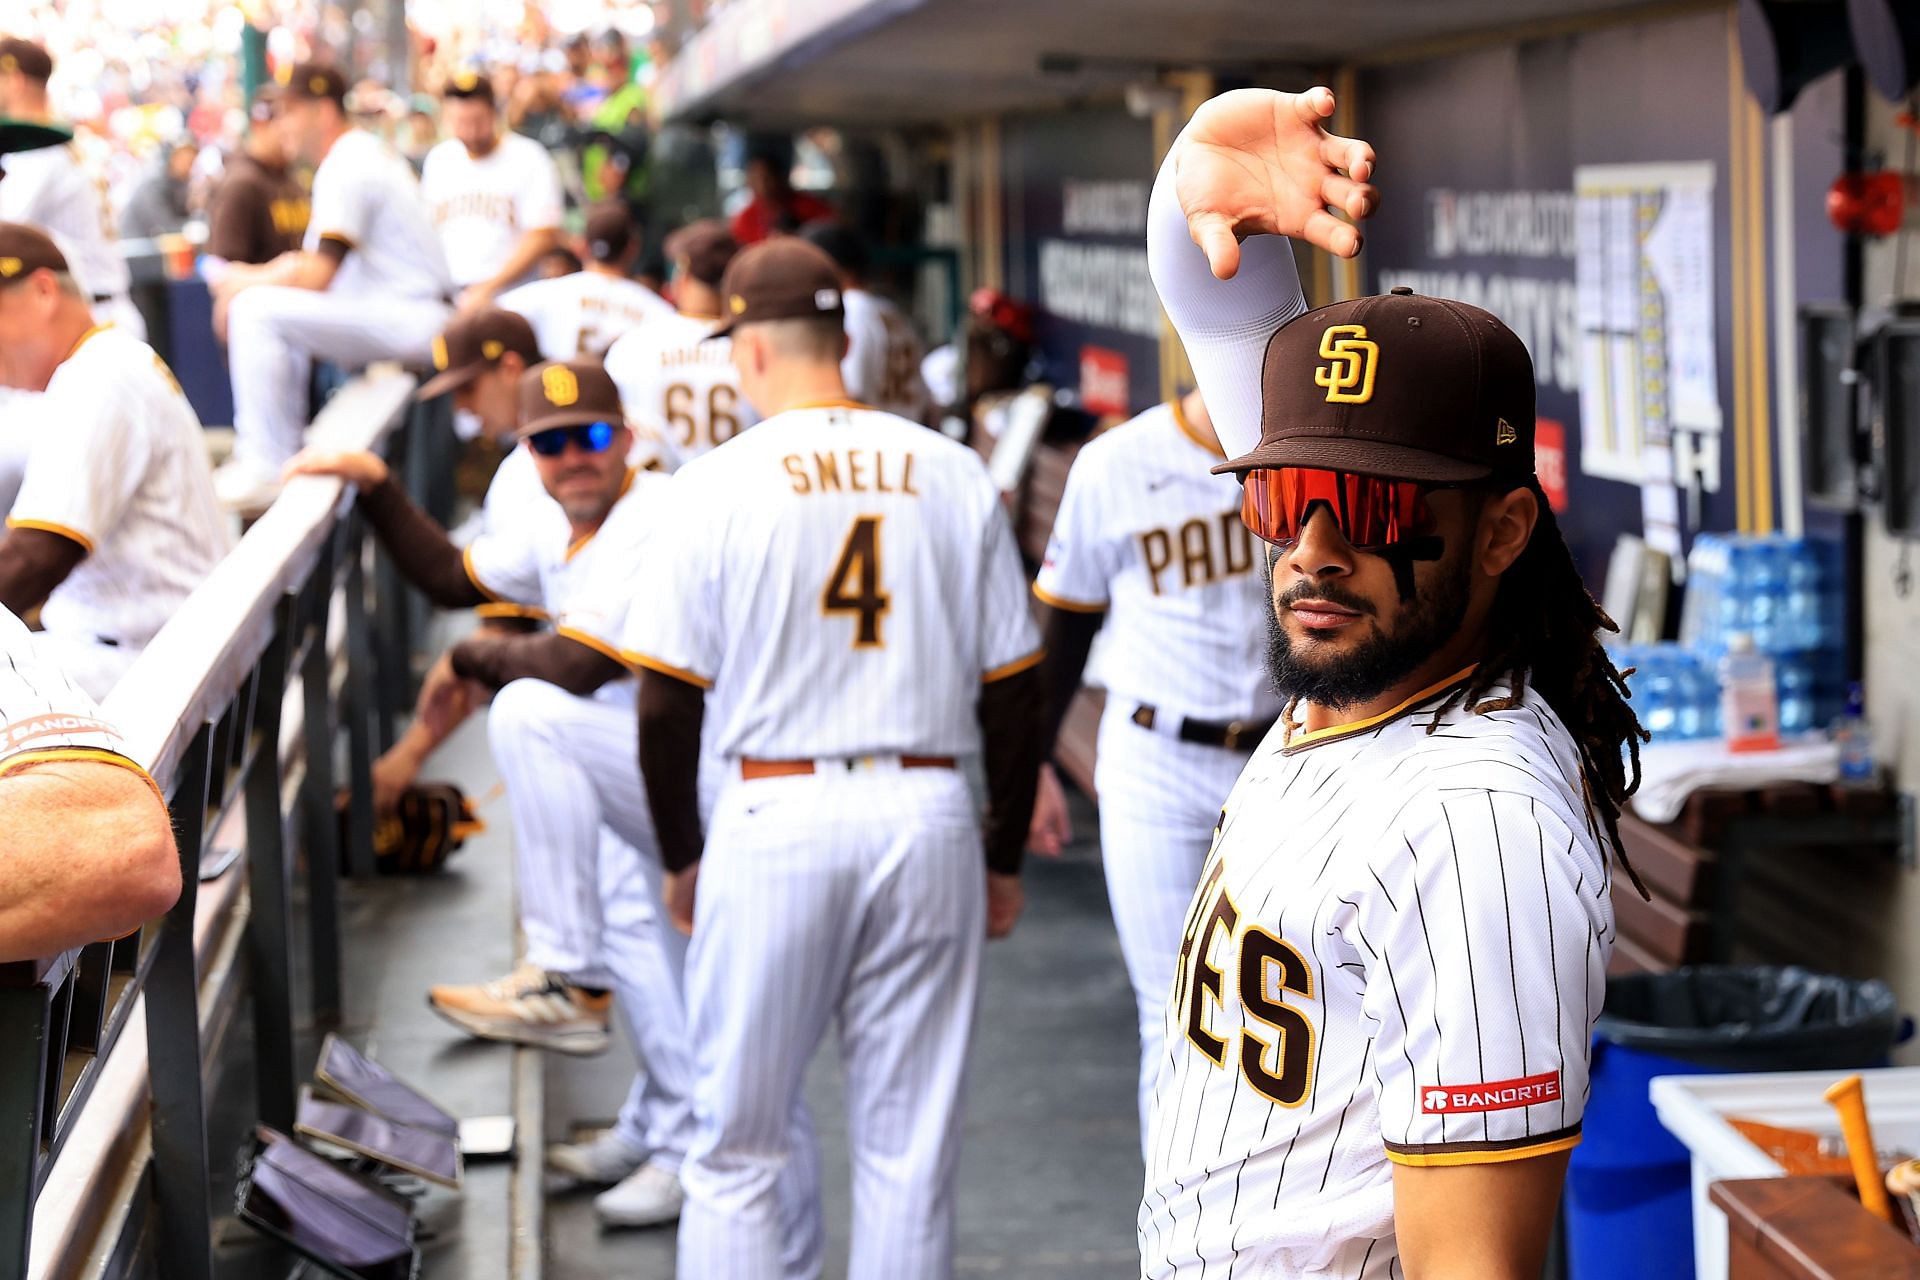 Fernando Tatis Jr. #23 of the San Diego Padres waves to fans prior to a game against the San Francisco Giants